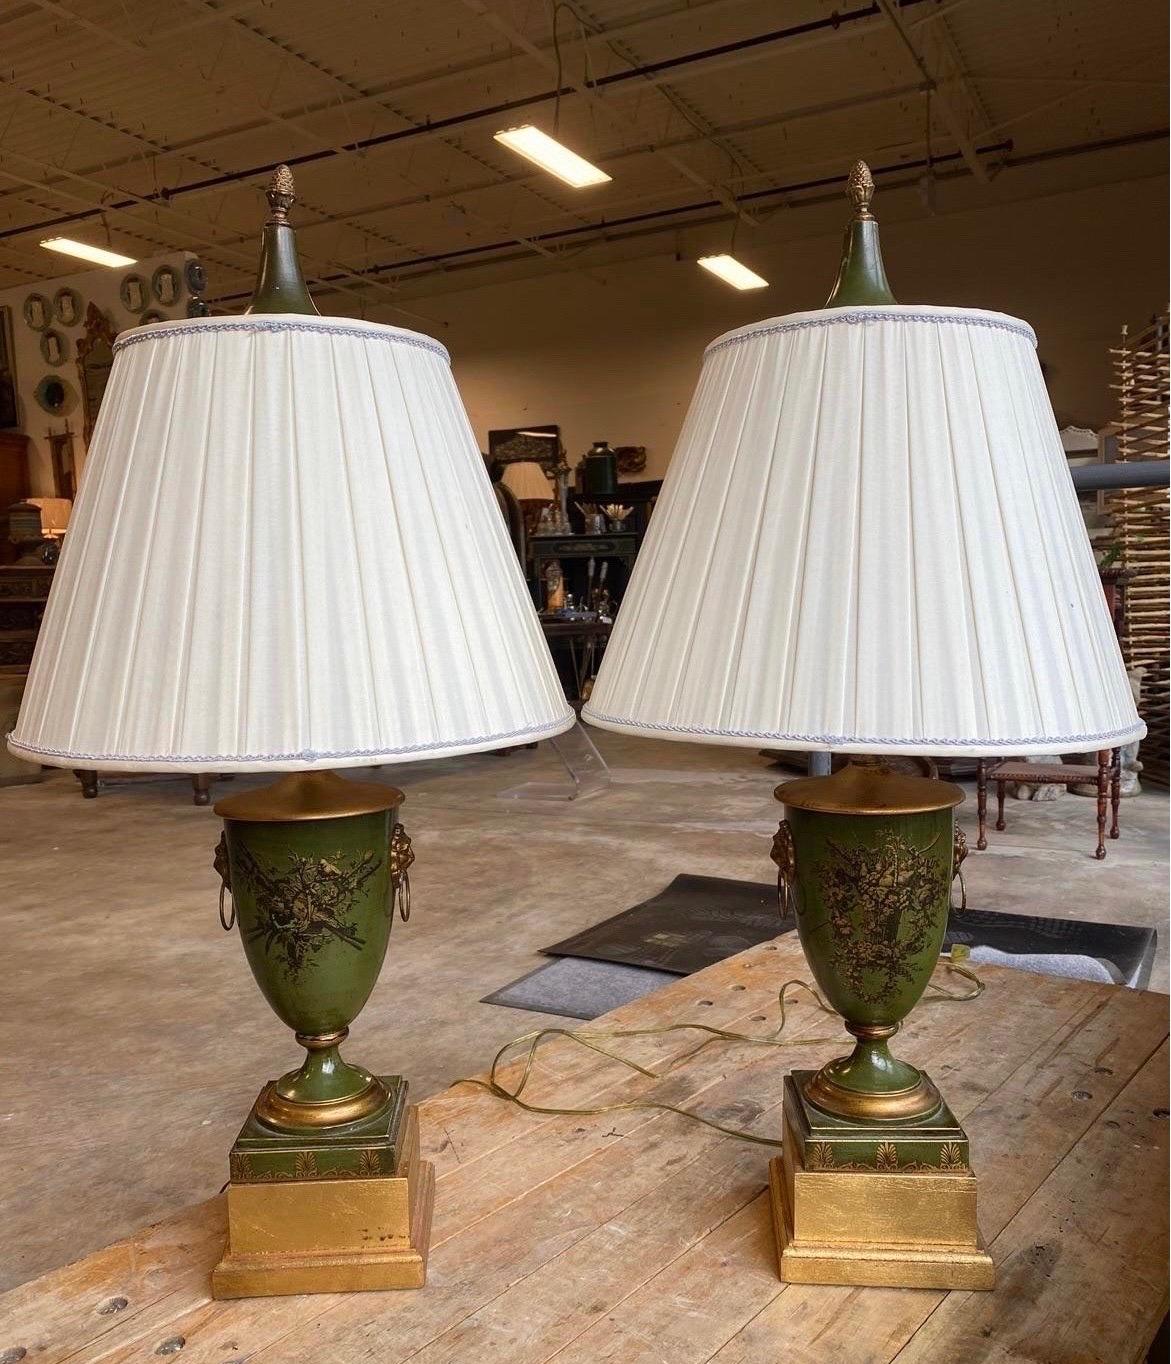 Pair, antique or vintage french green tole hunting urns which have been converted into table lamps. Retain original lids which now rest on the top of shades over the finials.